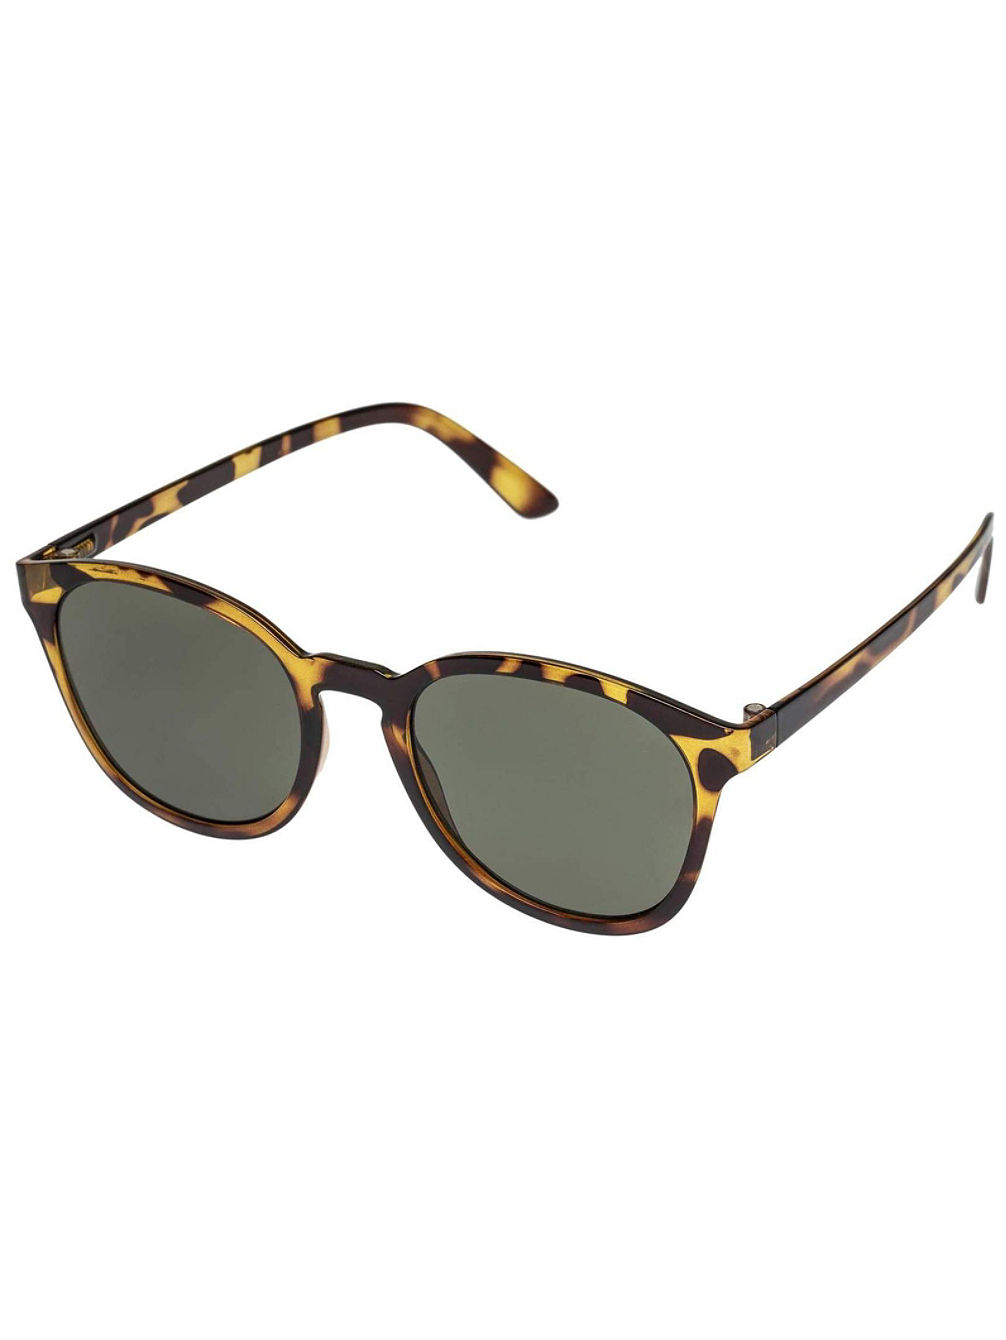 Renegade Syrup Tort Sunglasses